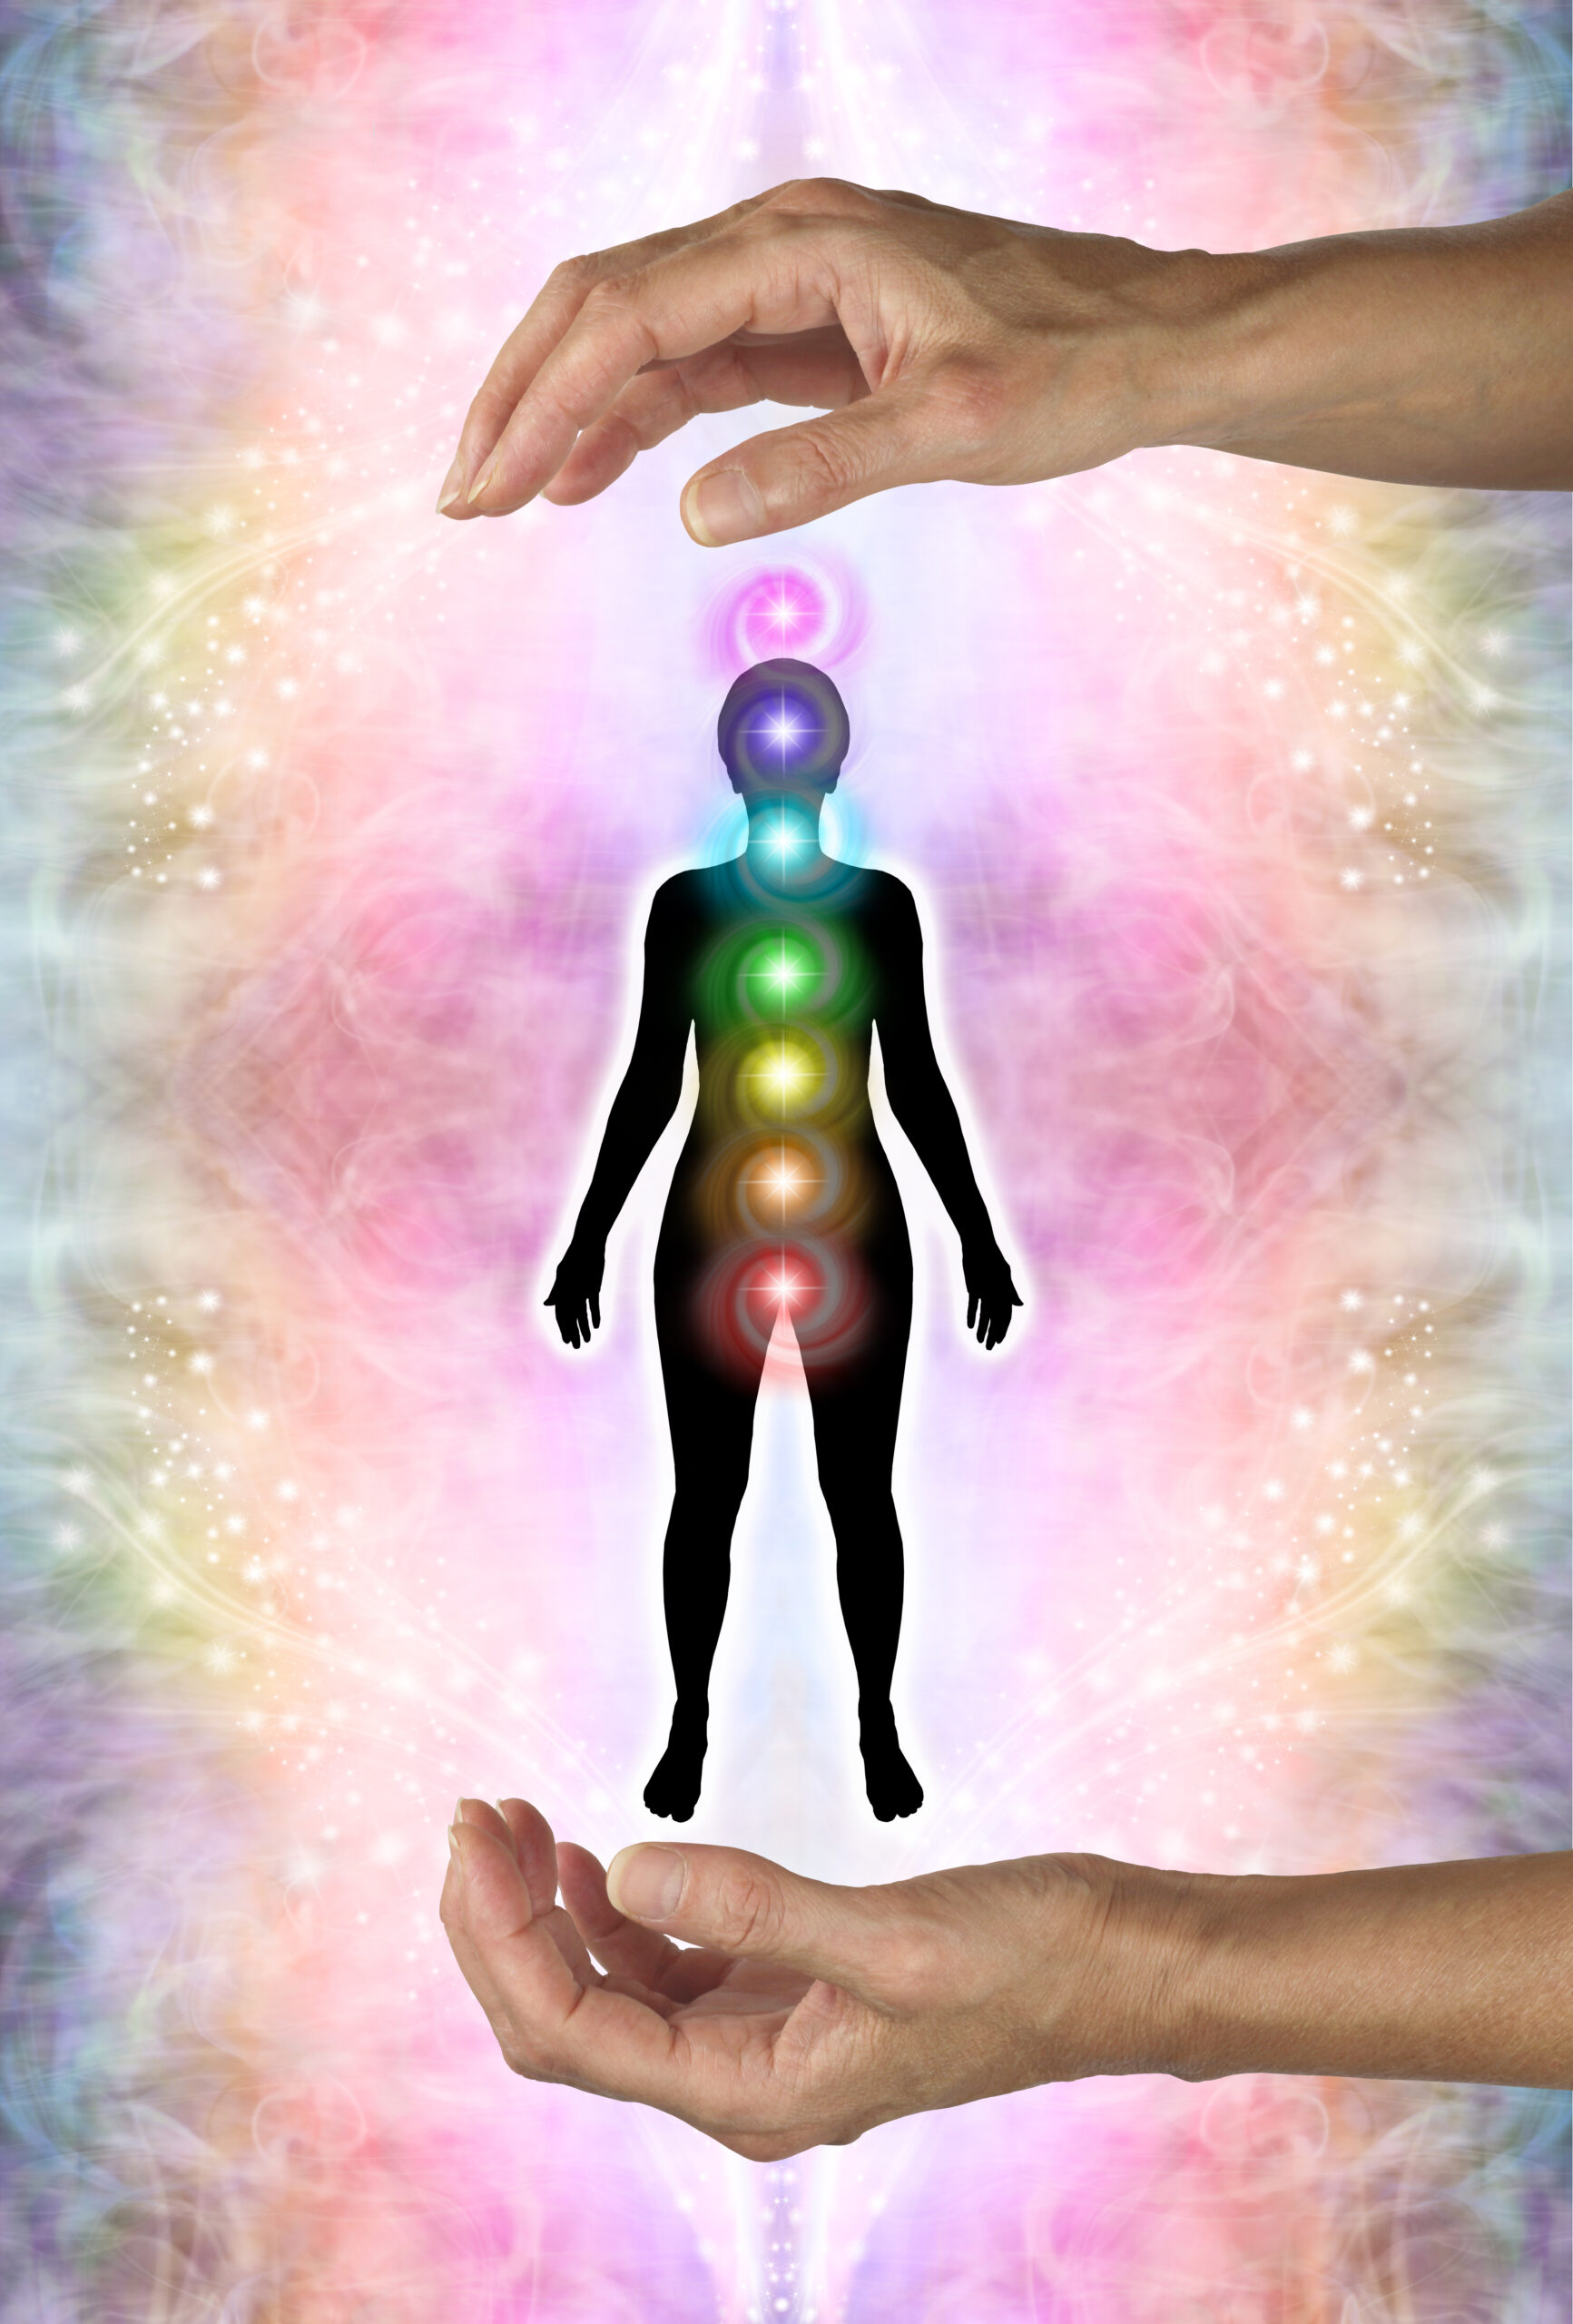 diagram of distant healing with hands above and below a female silhouette against an energy field background and the seven chakras